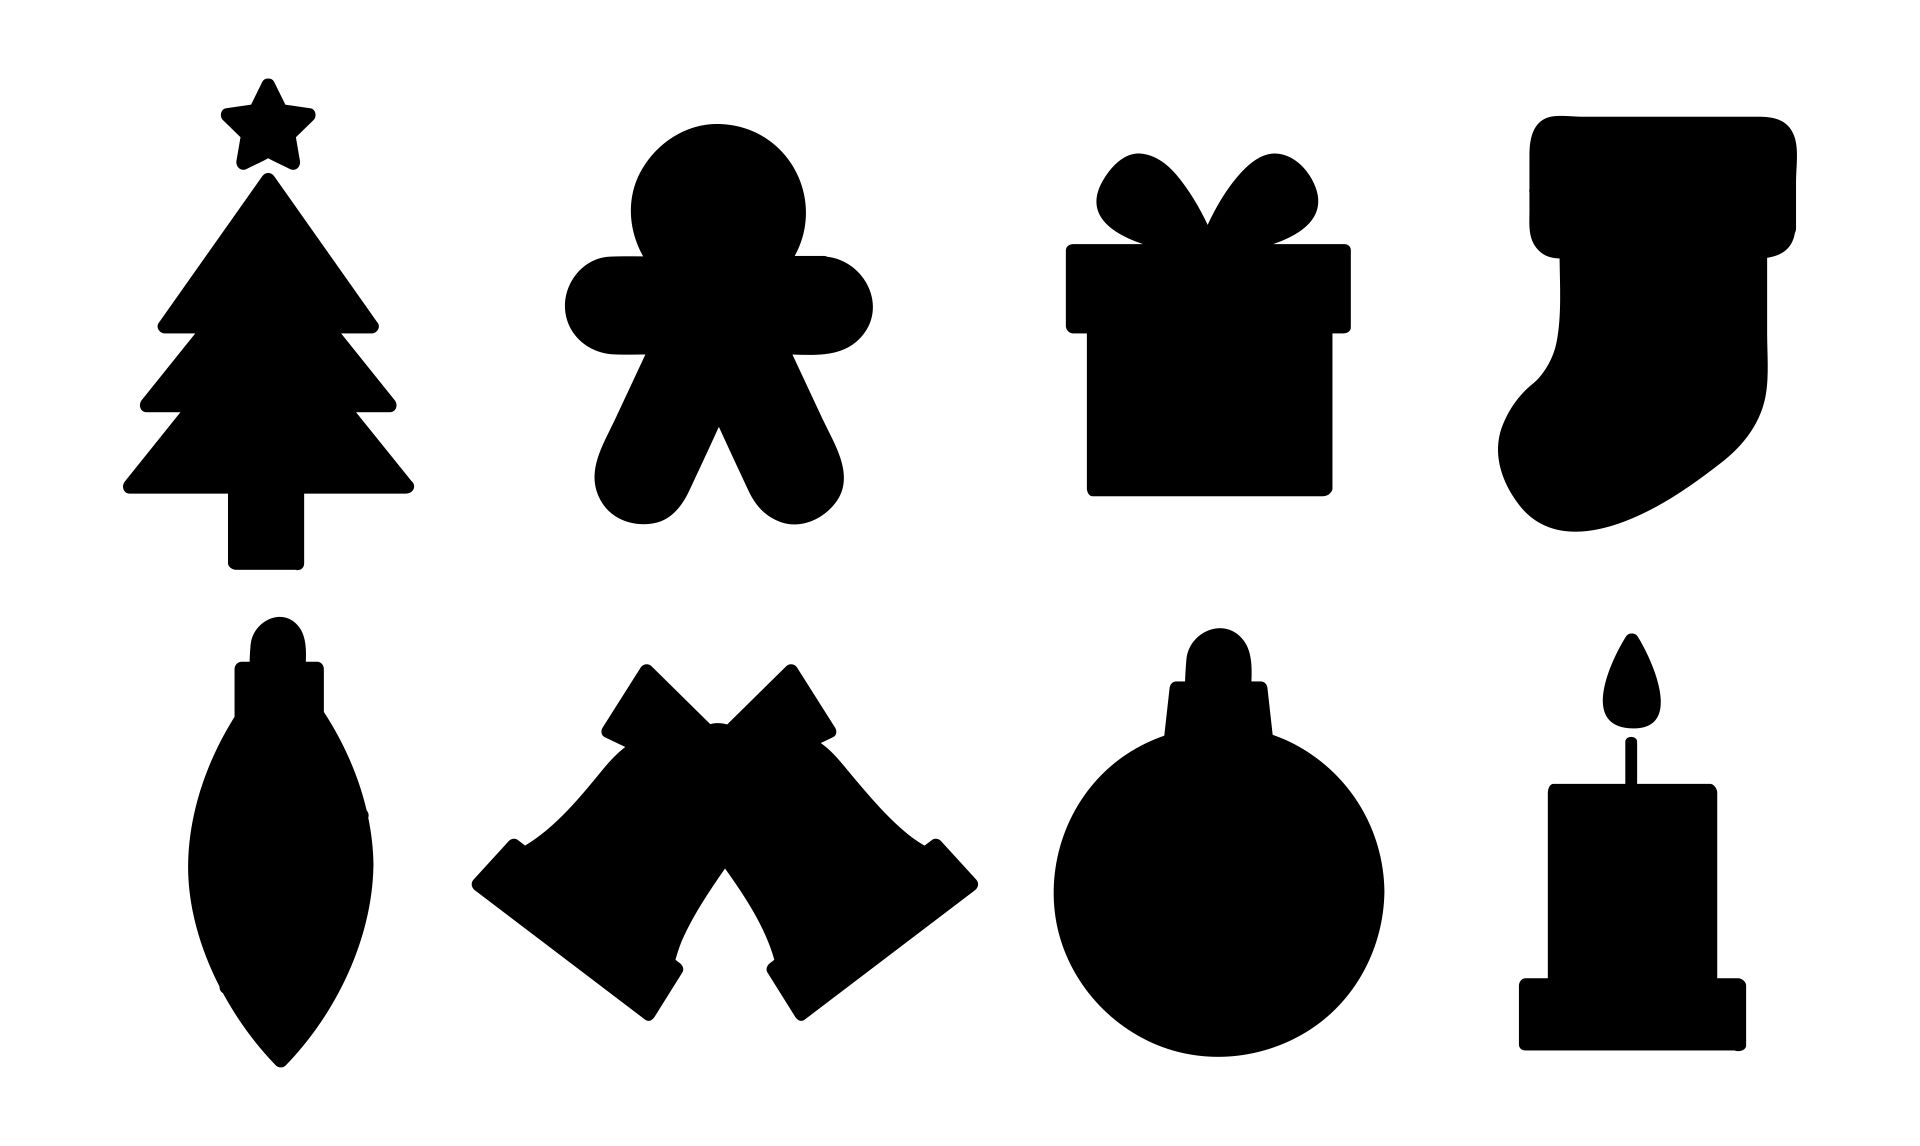 Printable Christmas Templates, Shapes And Silhouettes